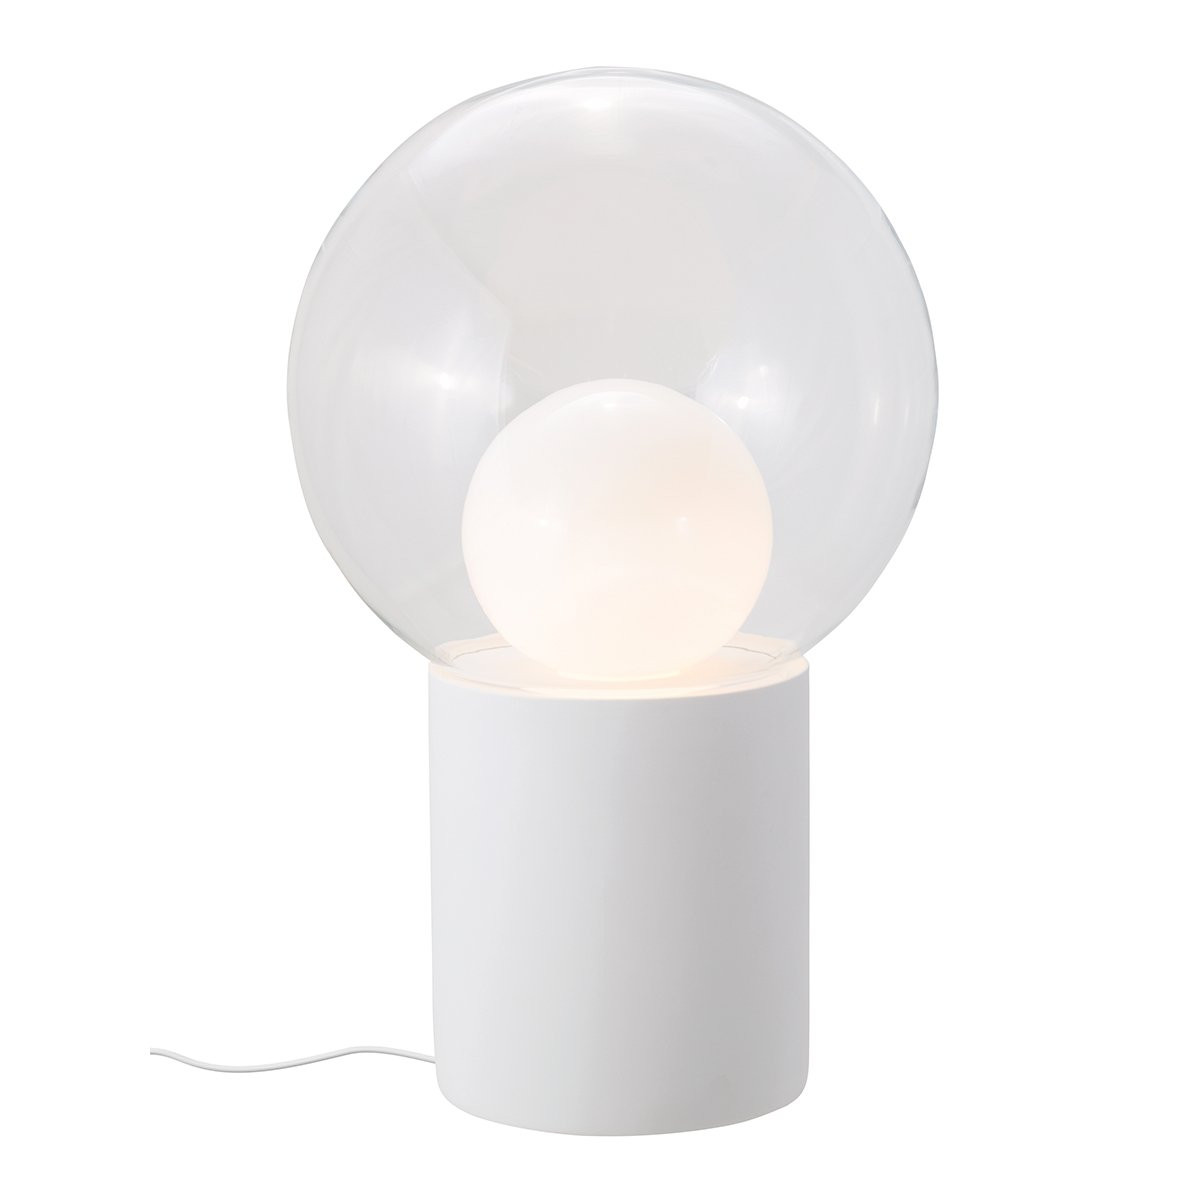 Pulpo Boule High Vloerlamp - Wit / Transparant / Opaal wit